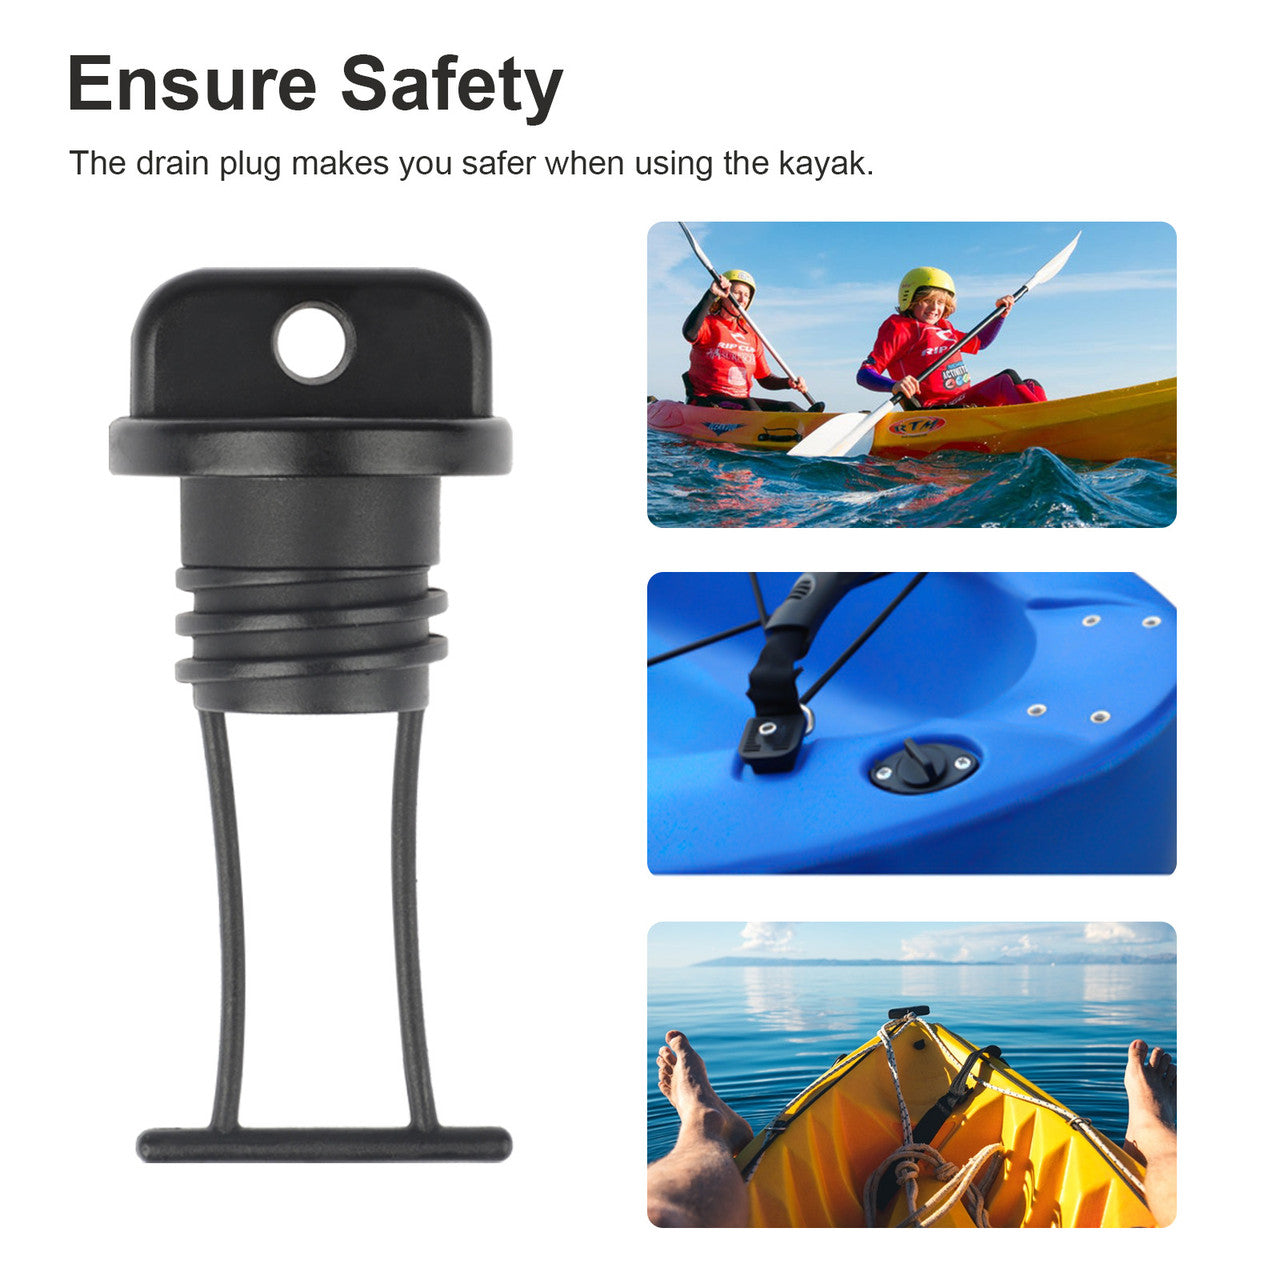 Universal Kayak Drain Plug for Preventing Water from Entering